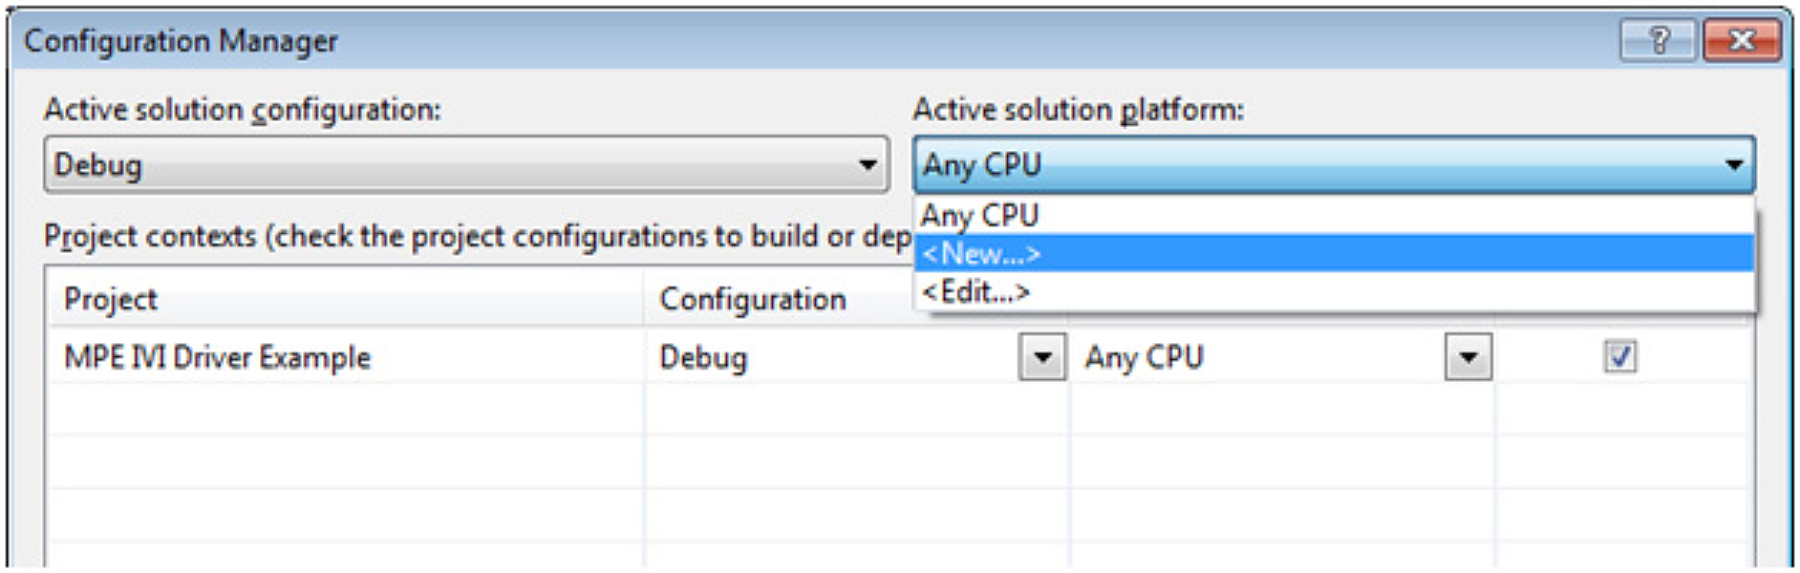 Figure 6. Configuration Manager's options for Active solution platforms.